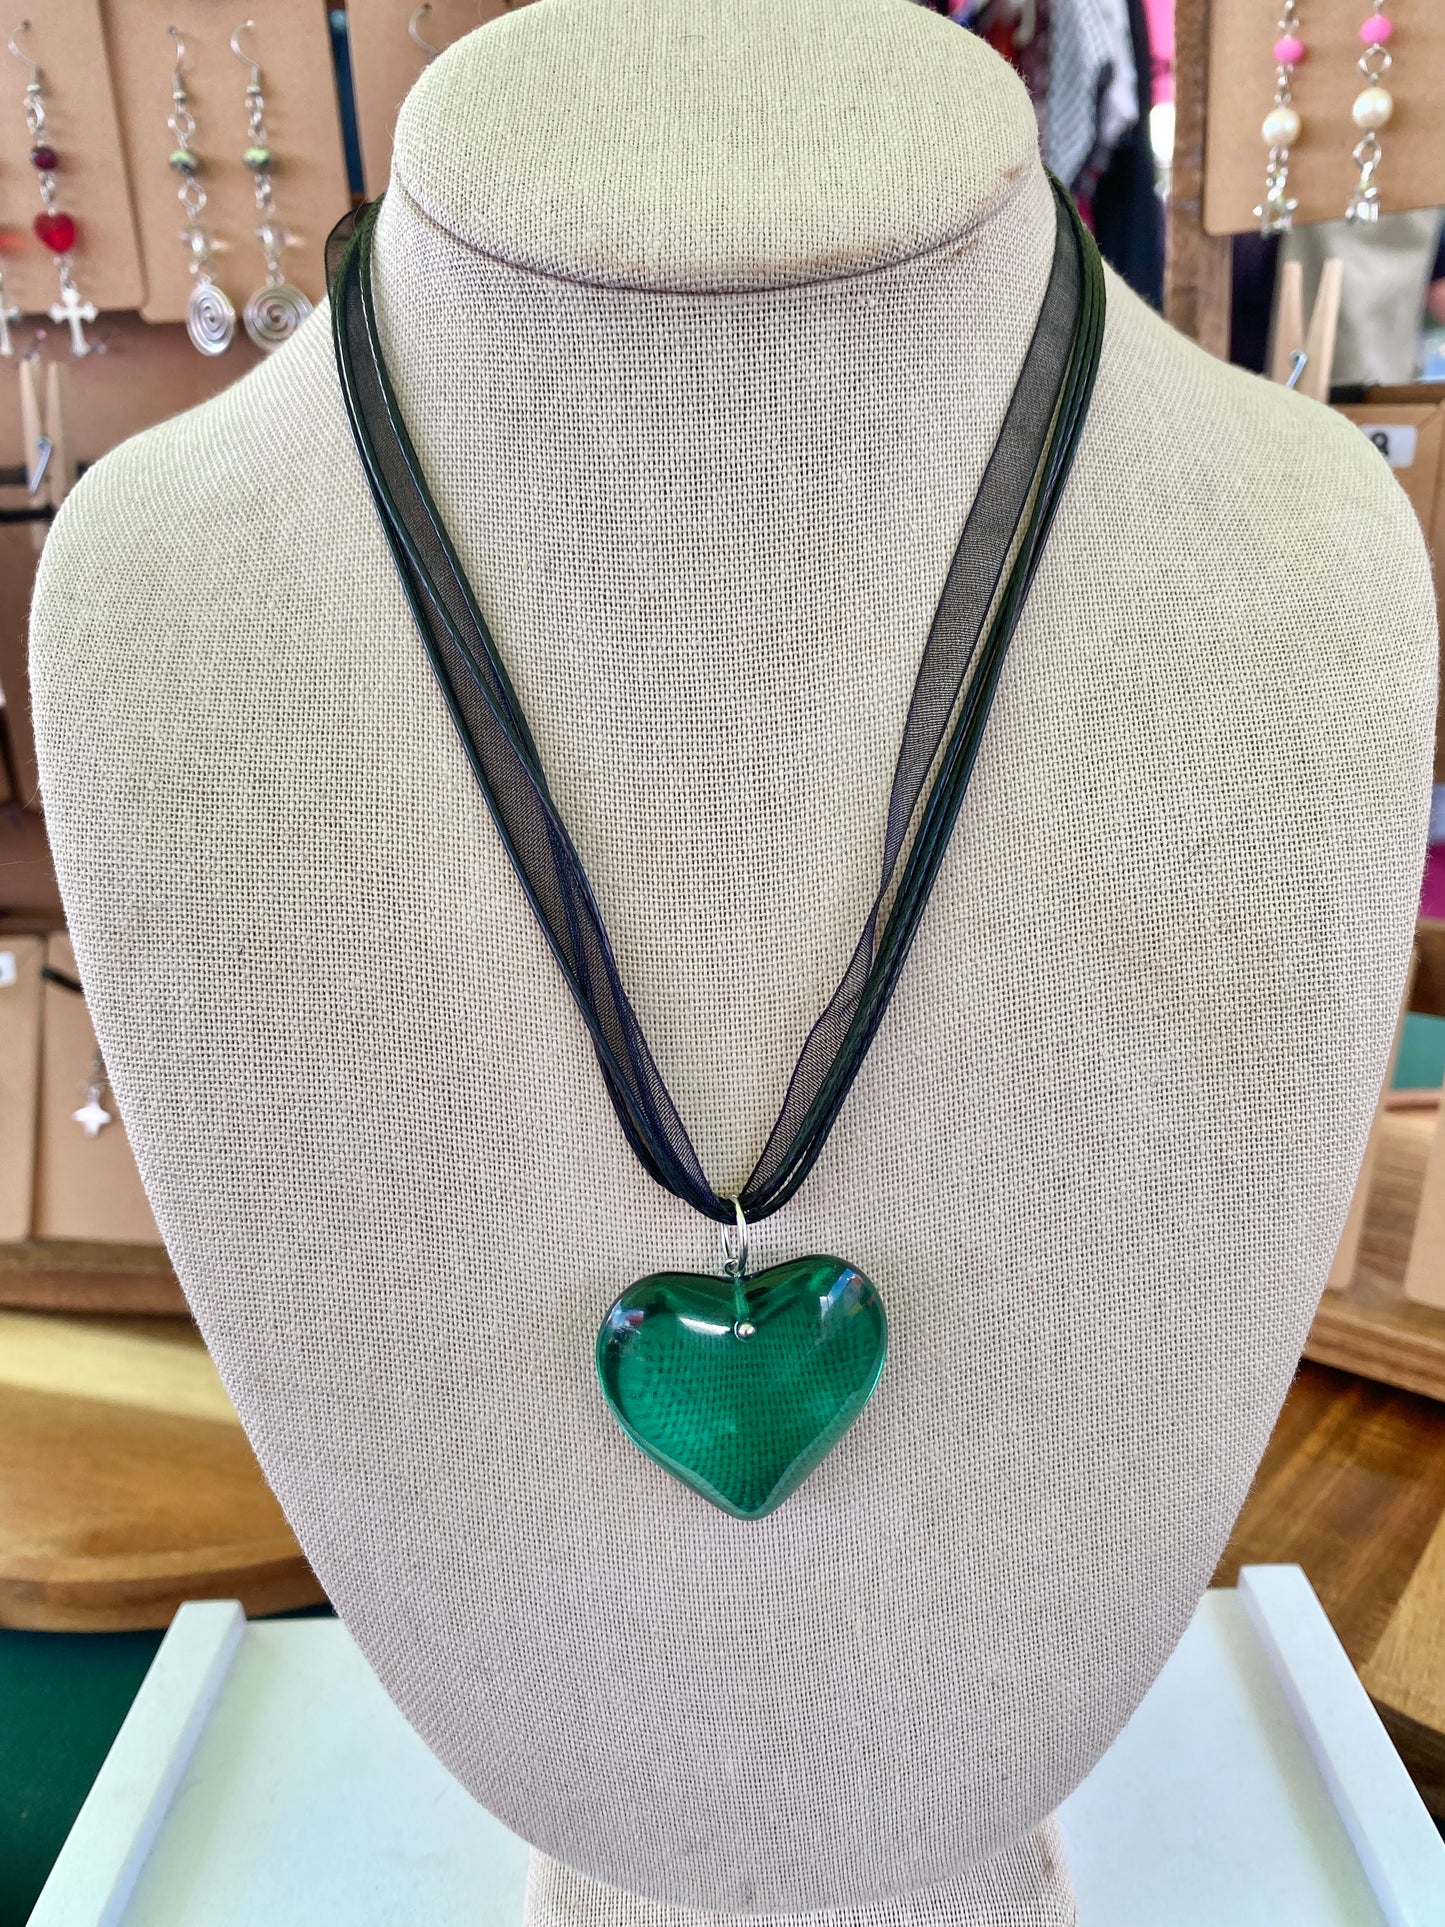 glass heart necklaces